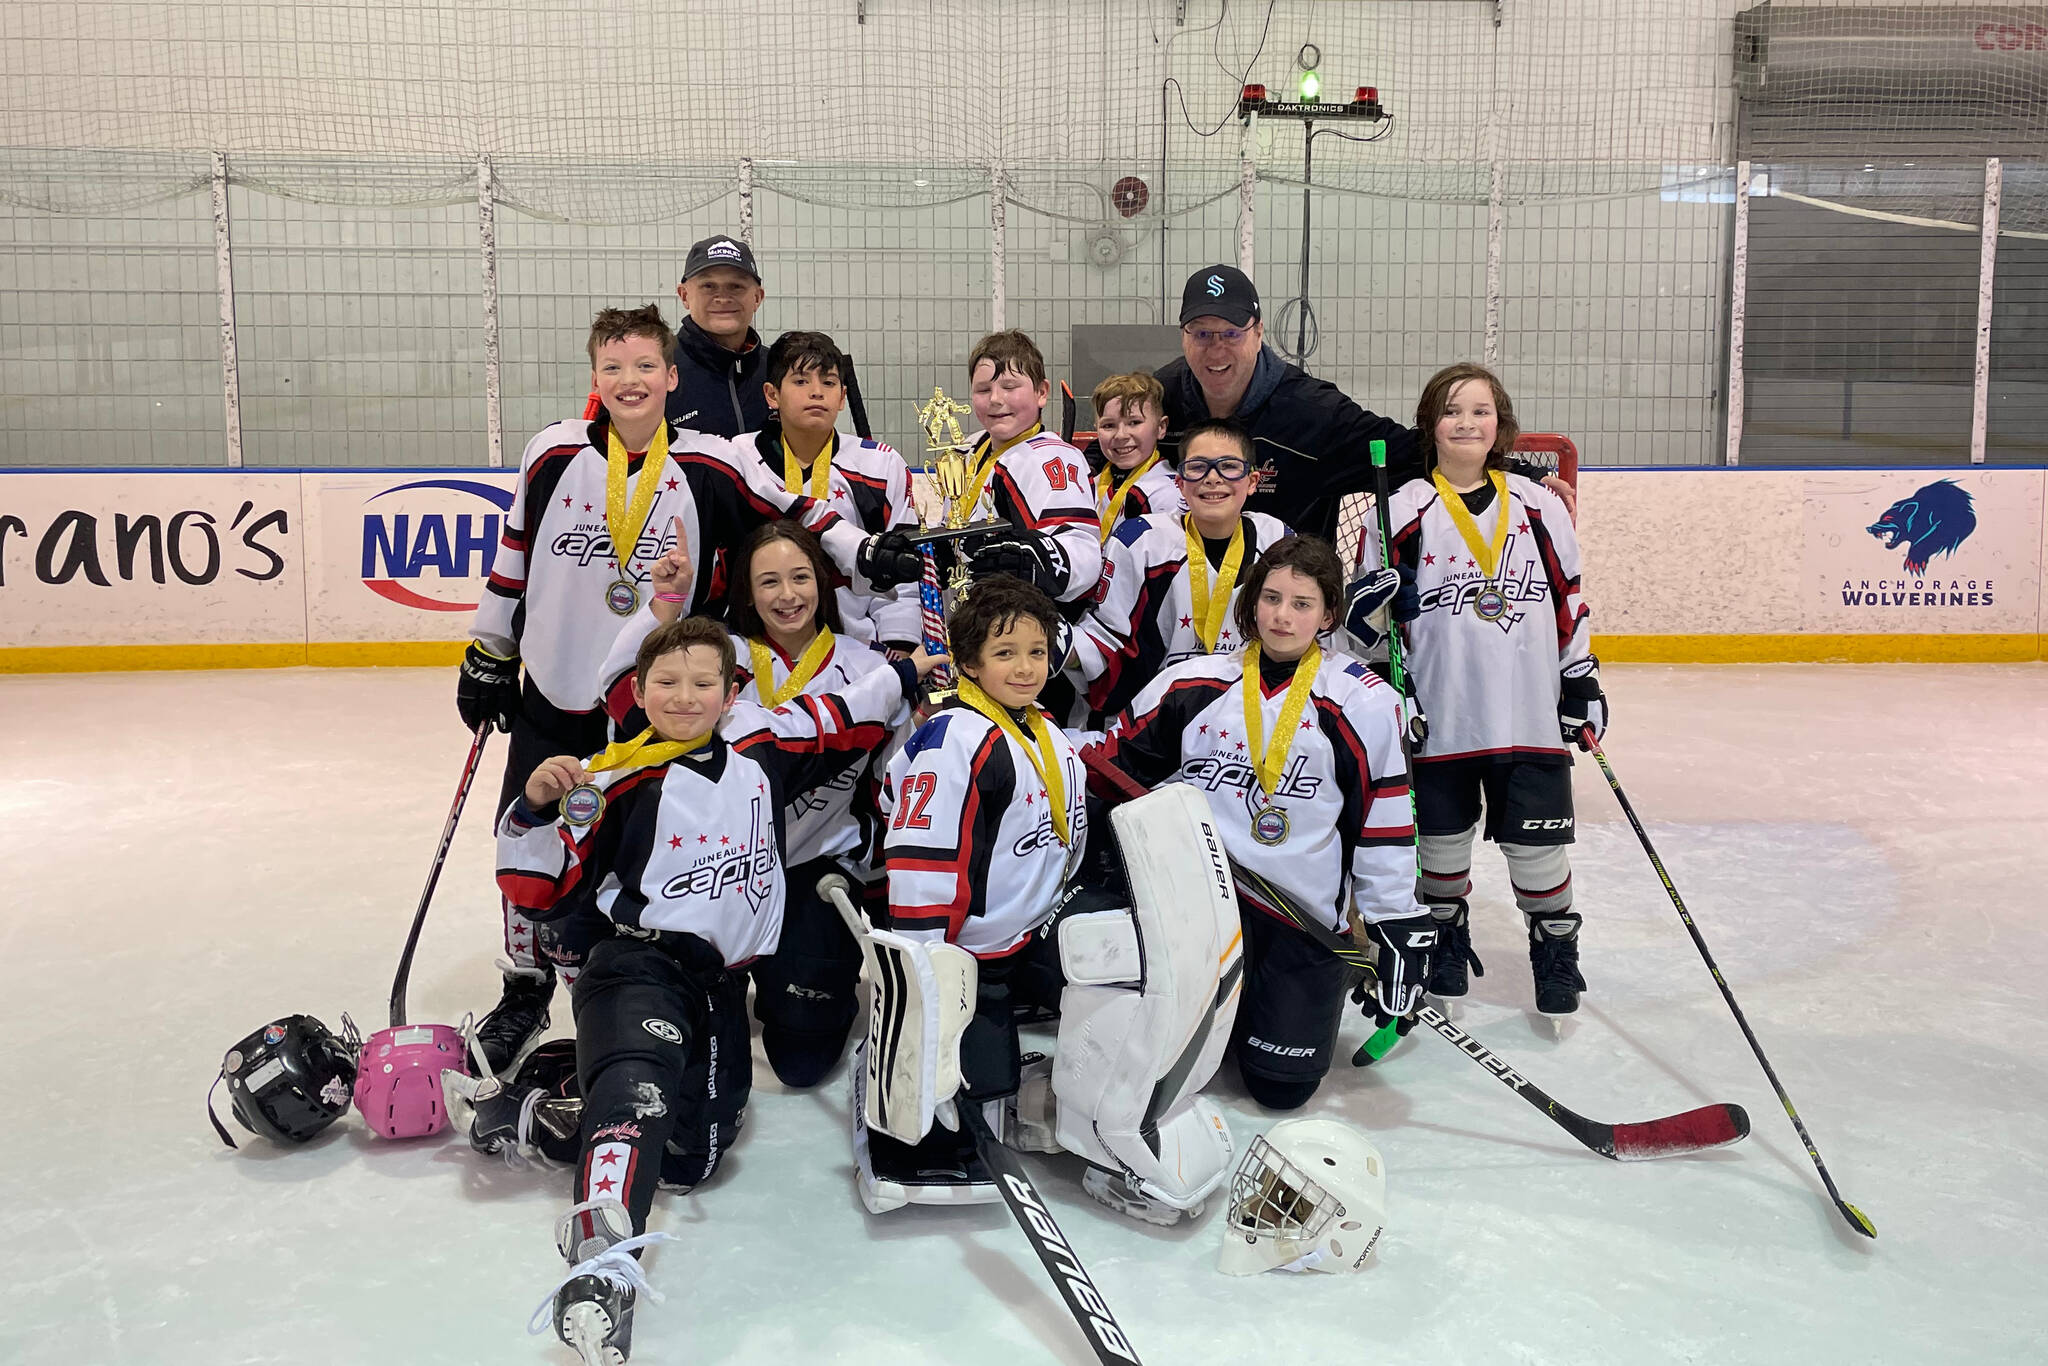 The Juneau Capitals 10-and-under team swept a tournament in Anchorage last weekend, winning all six games. (Courtesy photo / Jamie Troxel)